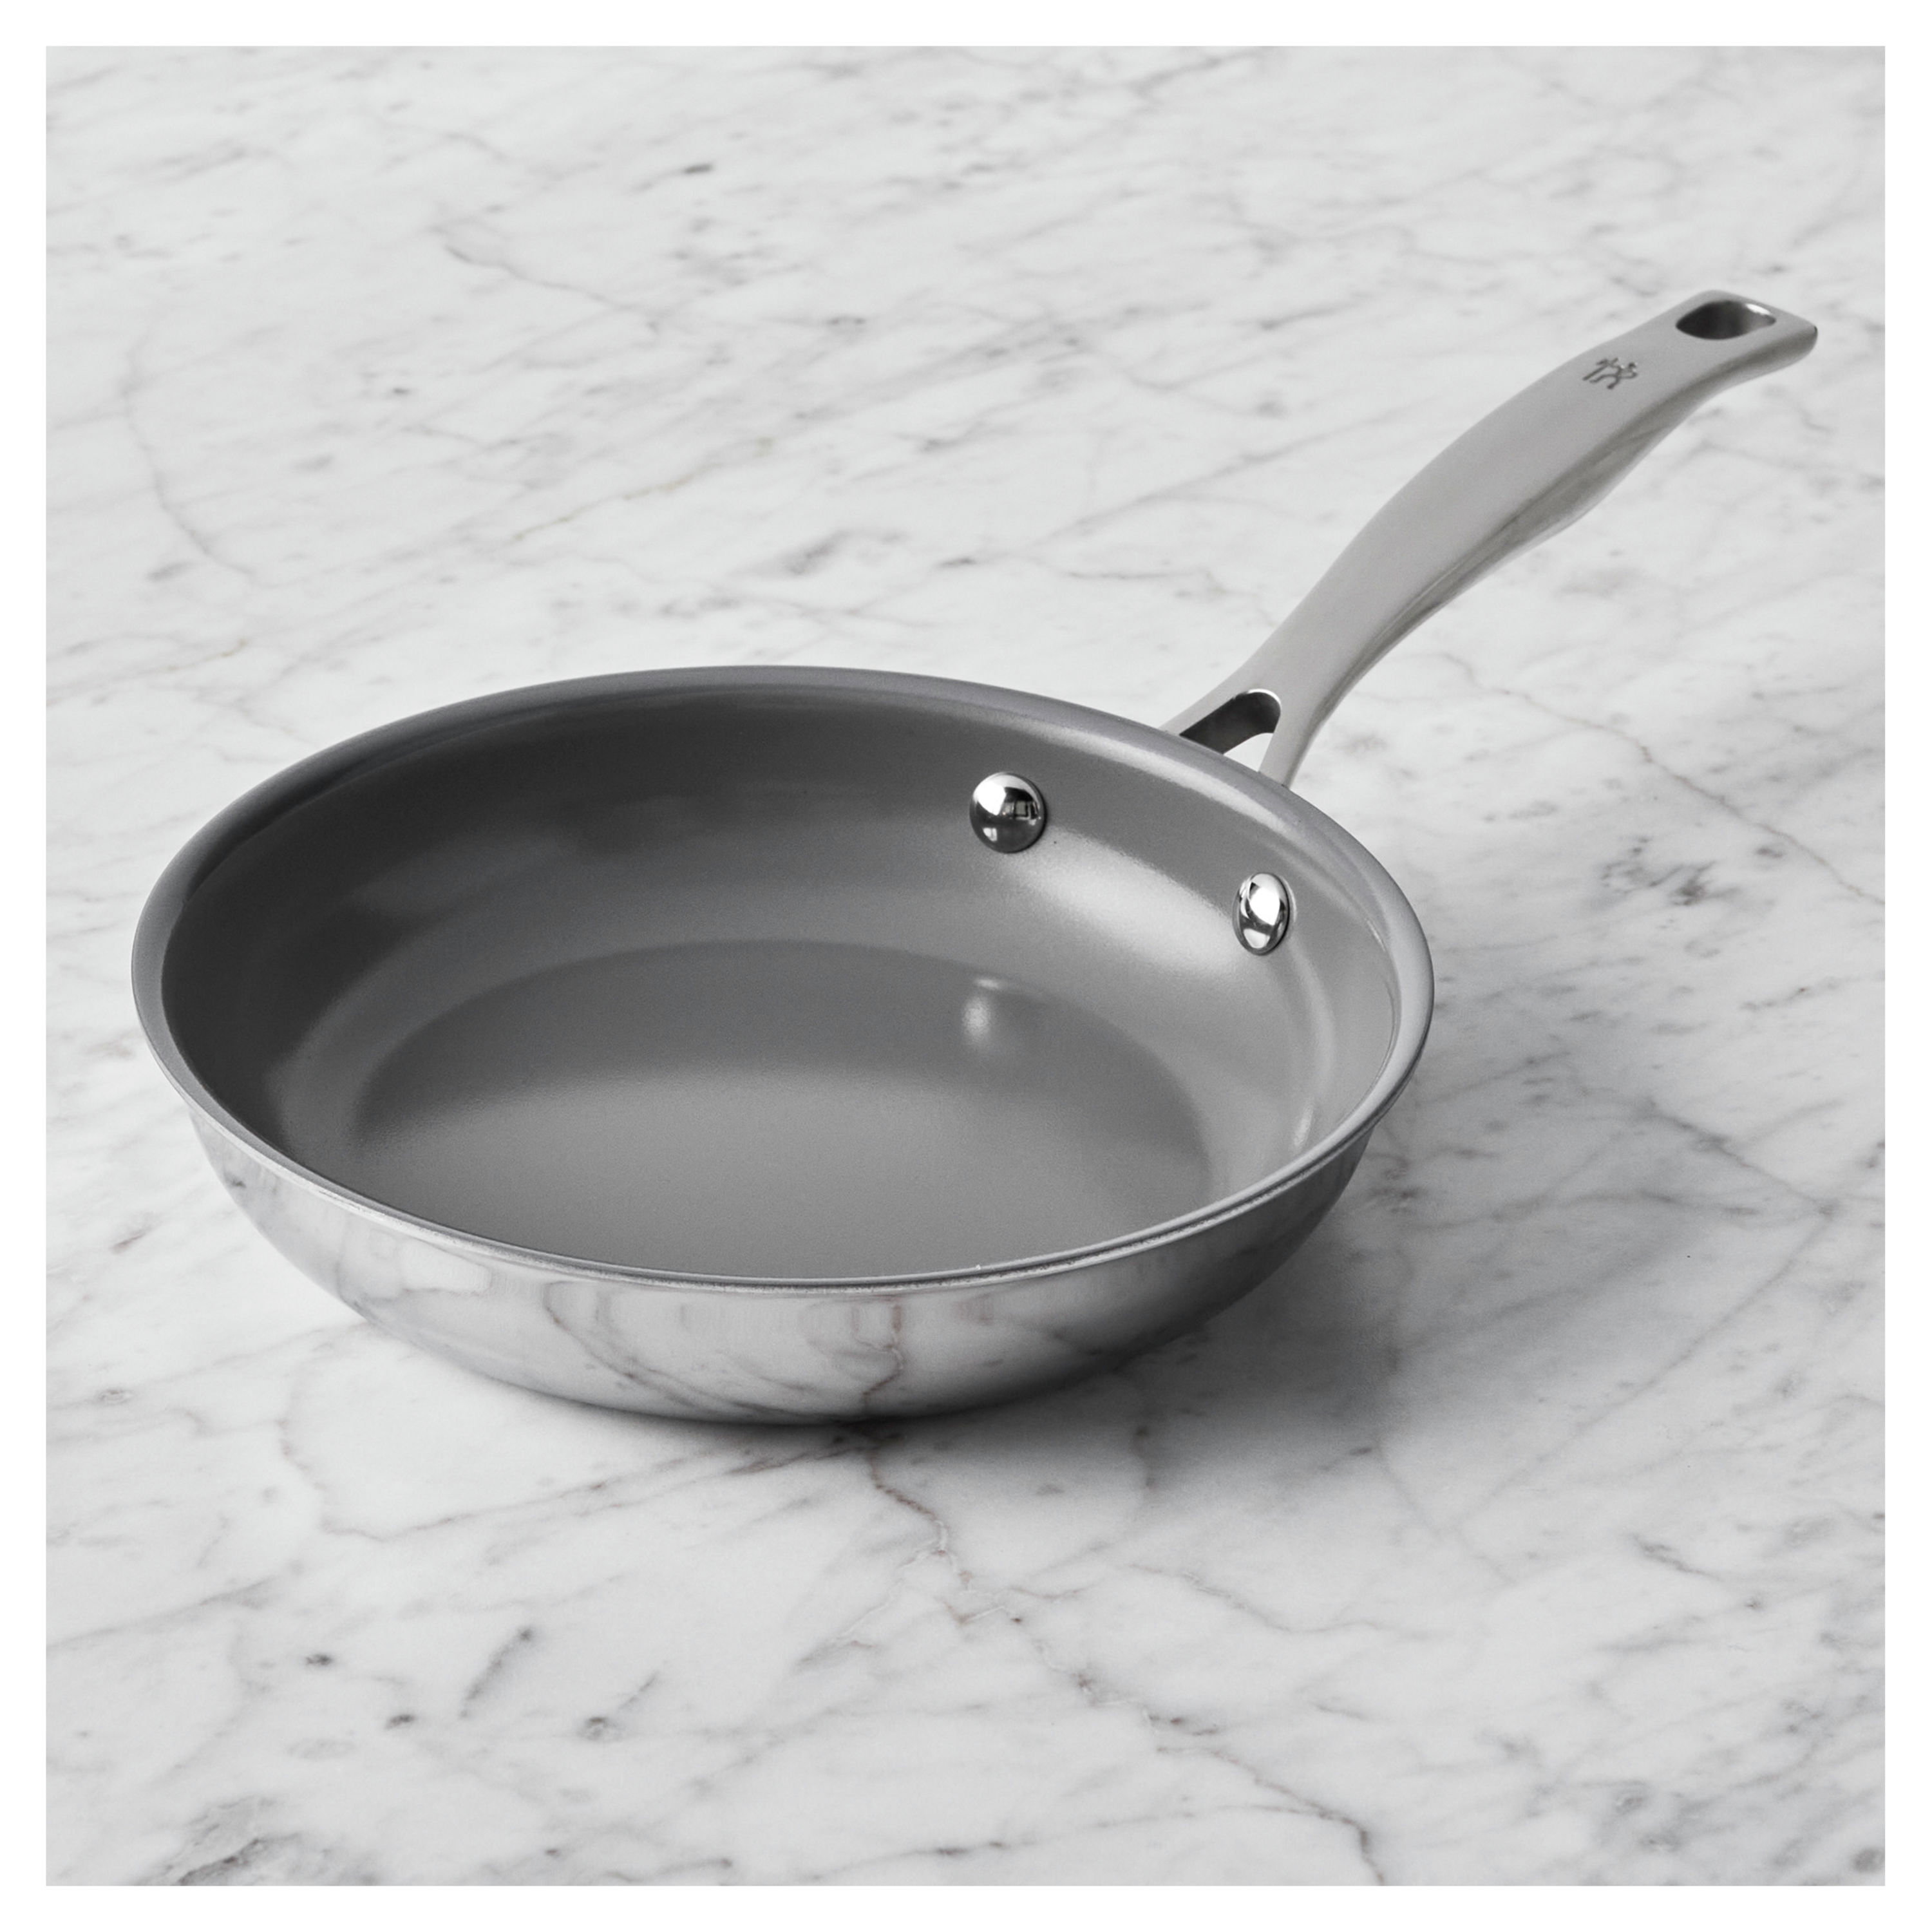 Henckels Clad H3 8-inch, stainless steel, Non-stick, Frying pan